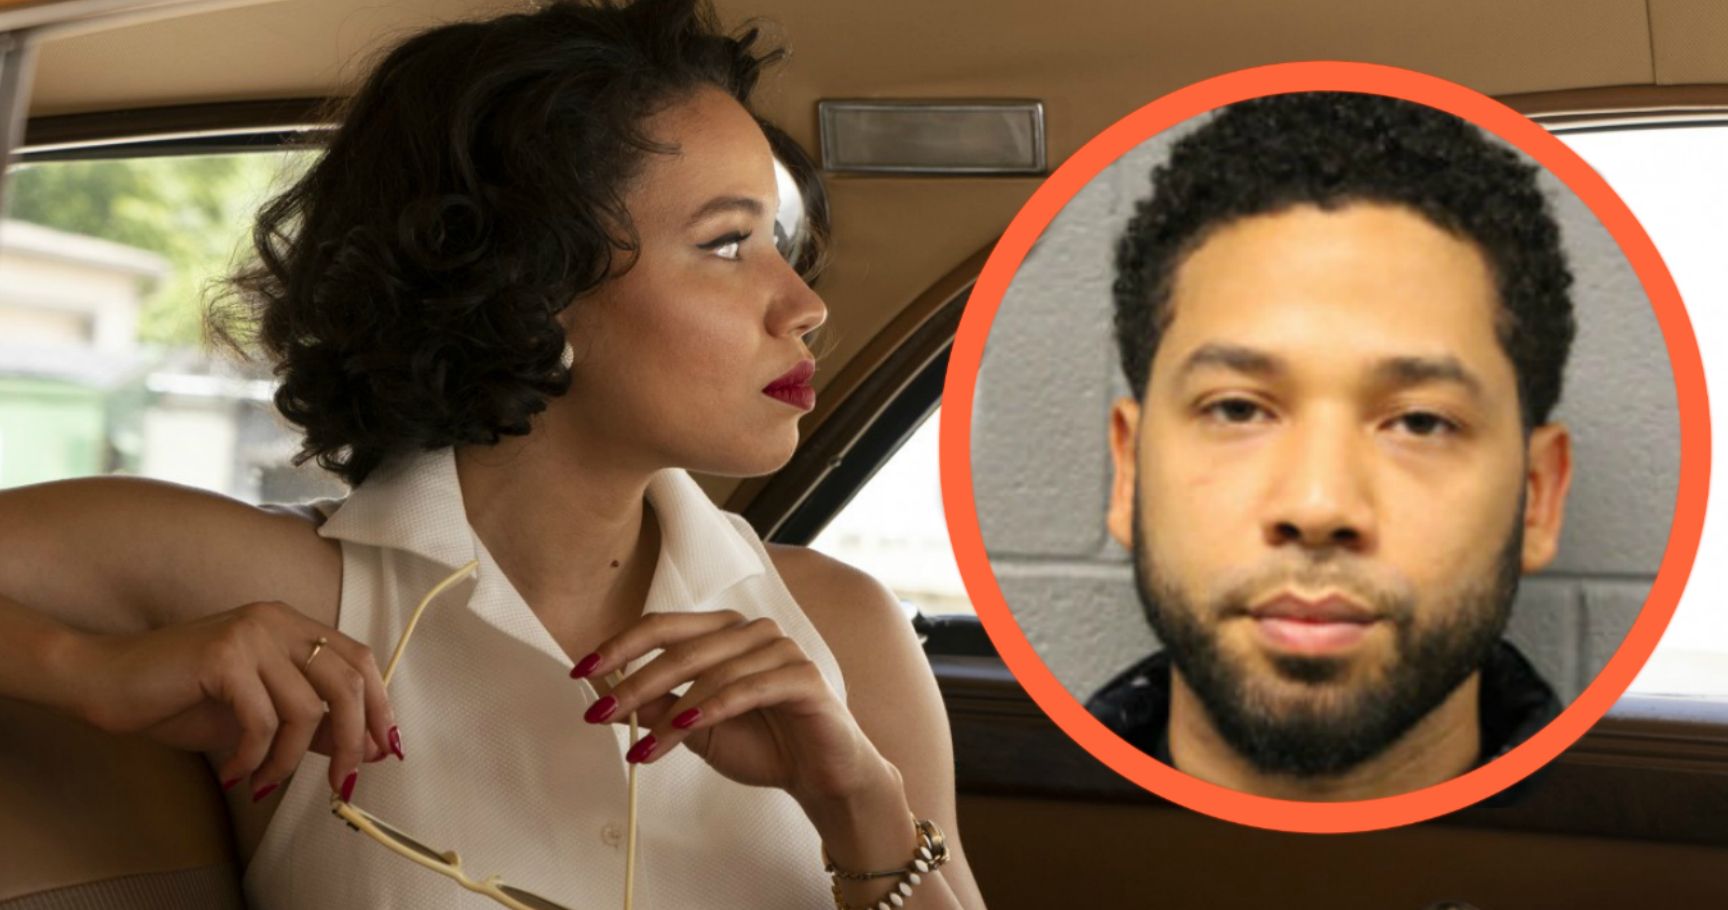 Lovecraft Country Star Jurnee Smollett Speaks Out on Brother Jussie's Hate Crime Controversy